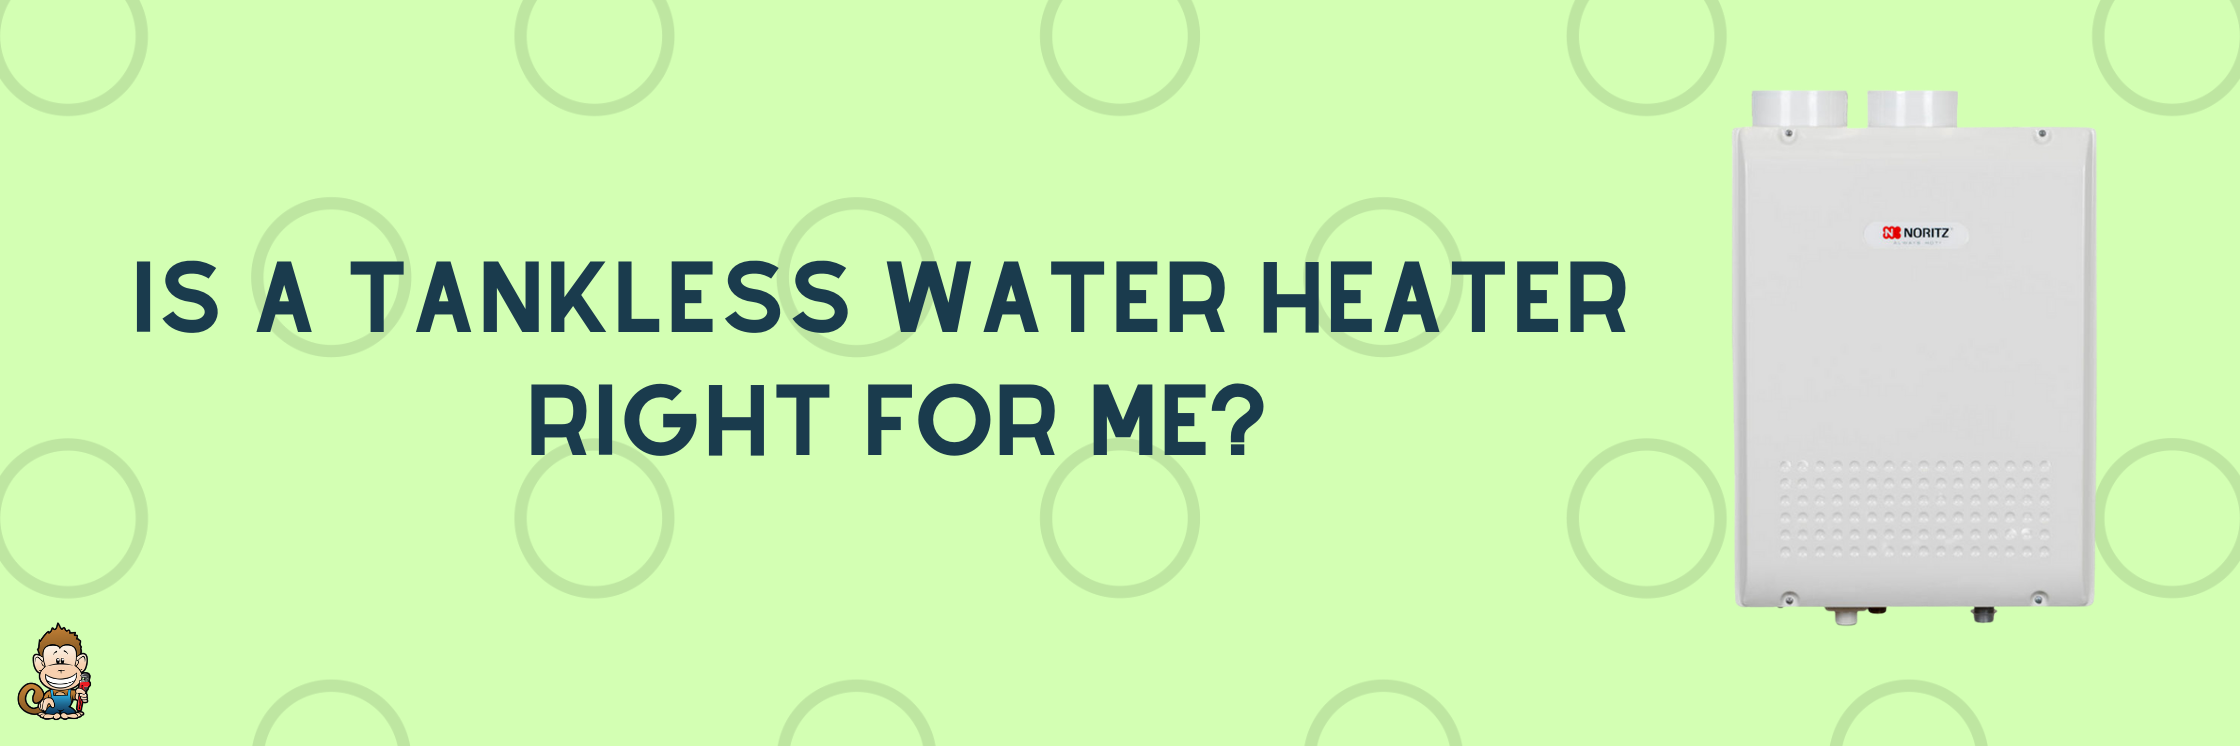 Is a Tankless Water Heater Right for Me?